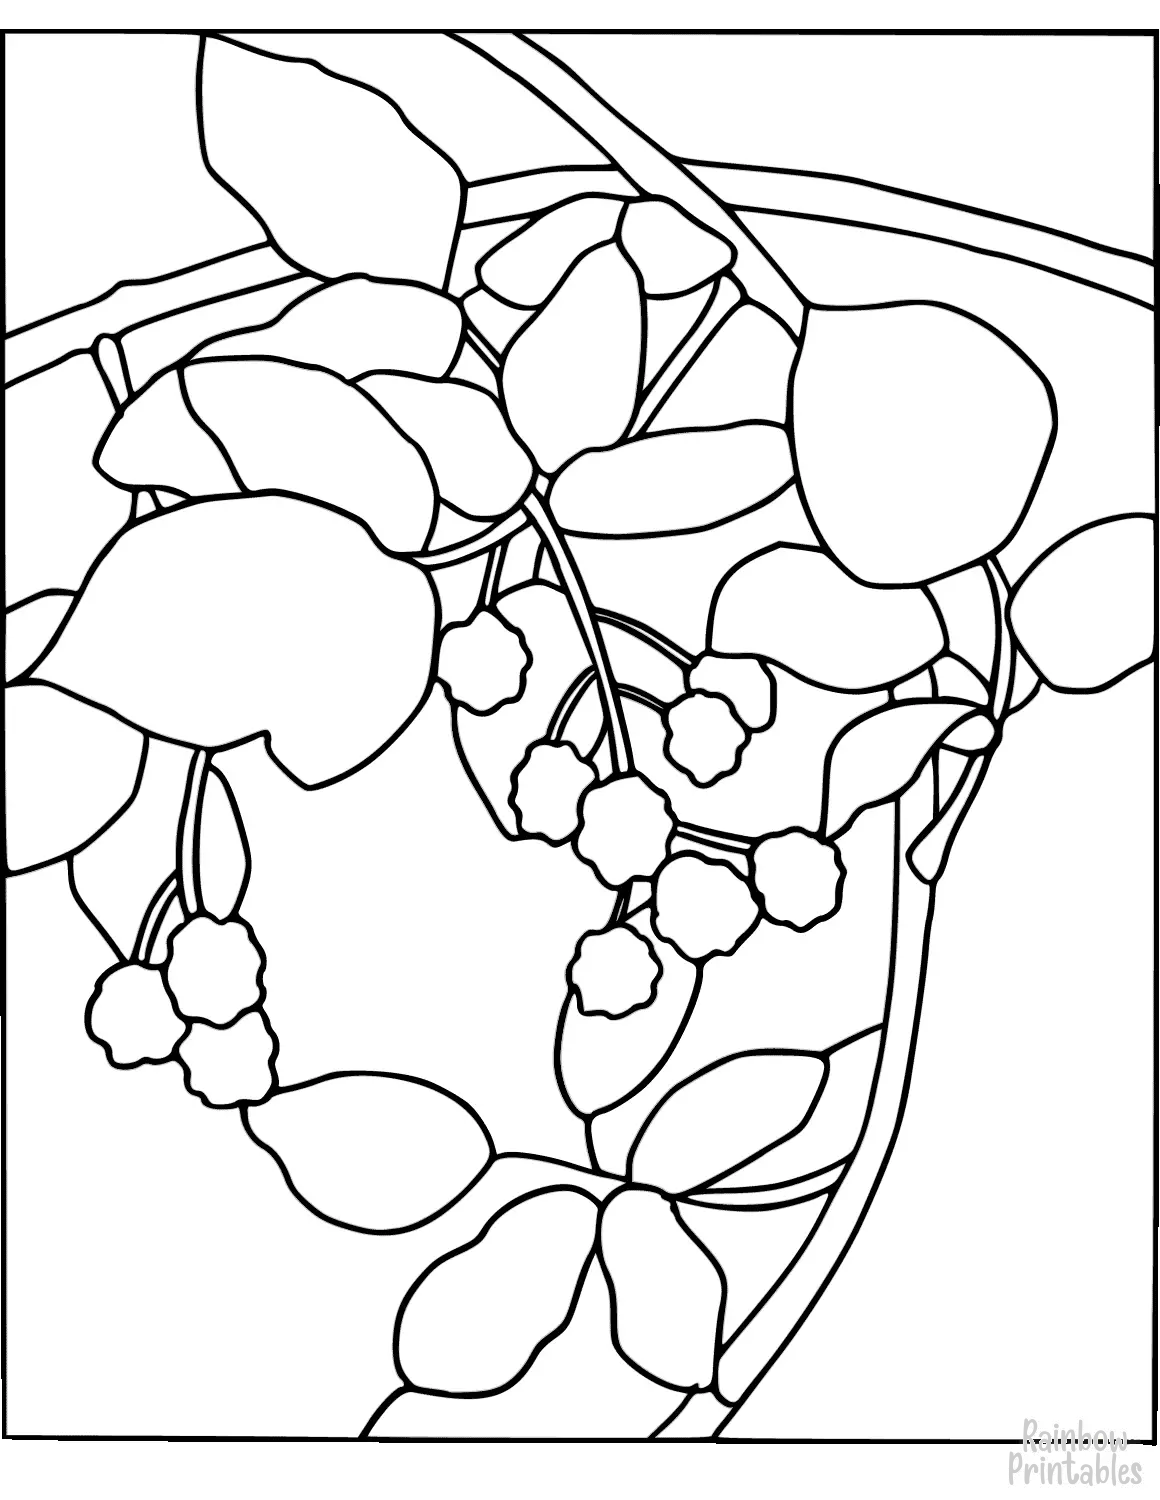 STAINED GLASS PLANT BERRIES Clipart Coloring Pages for Kids Adults Art Activities Line Art